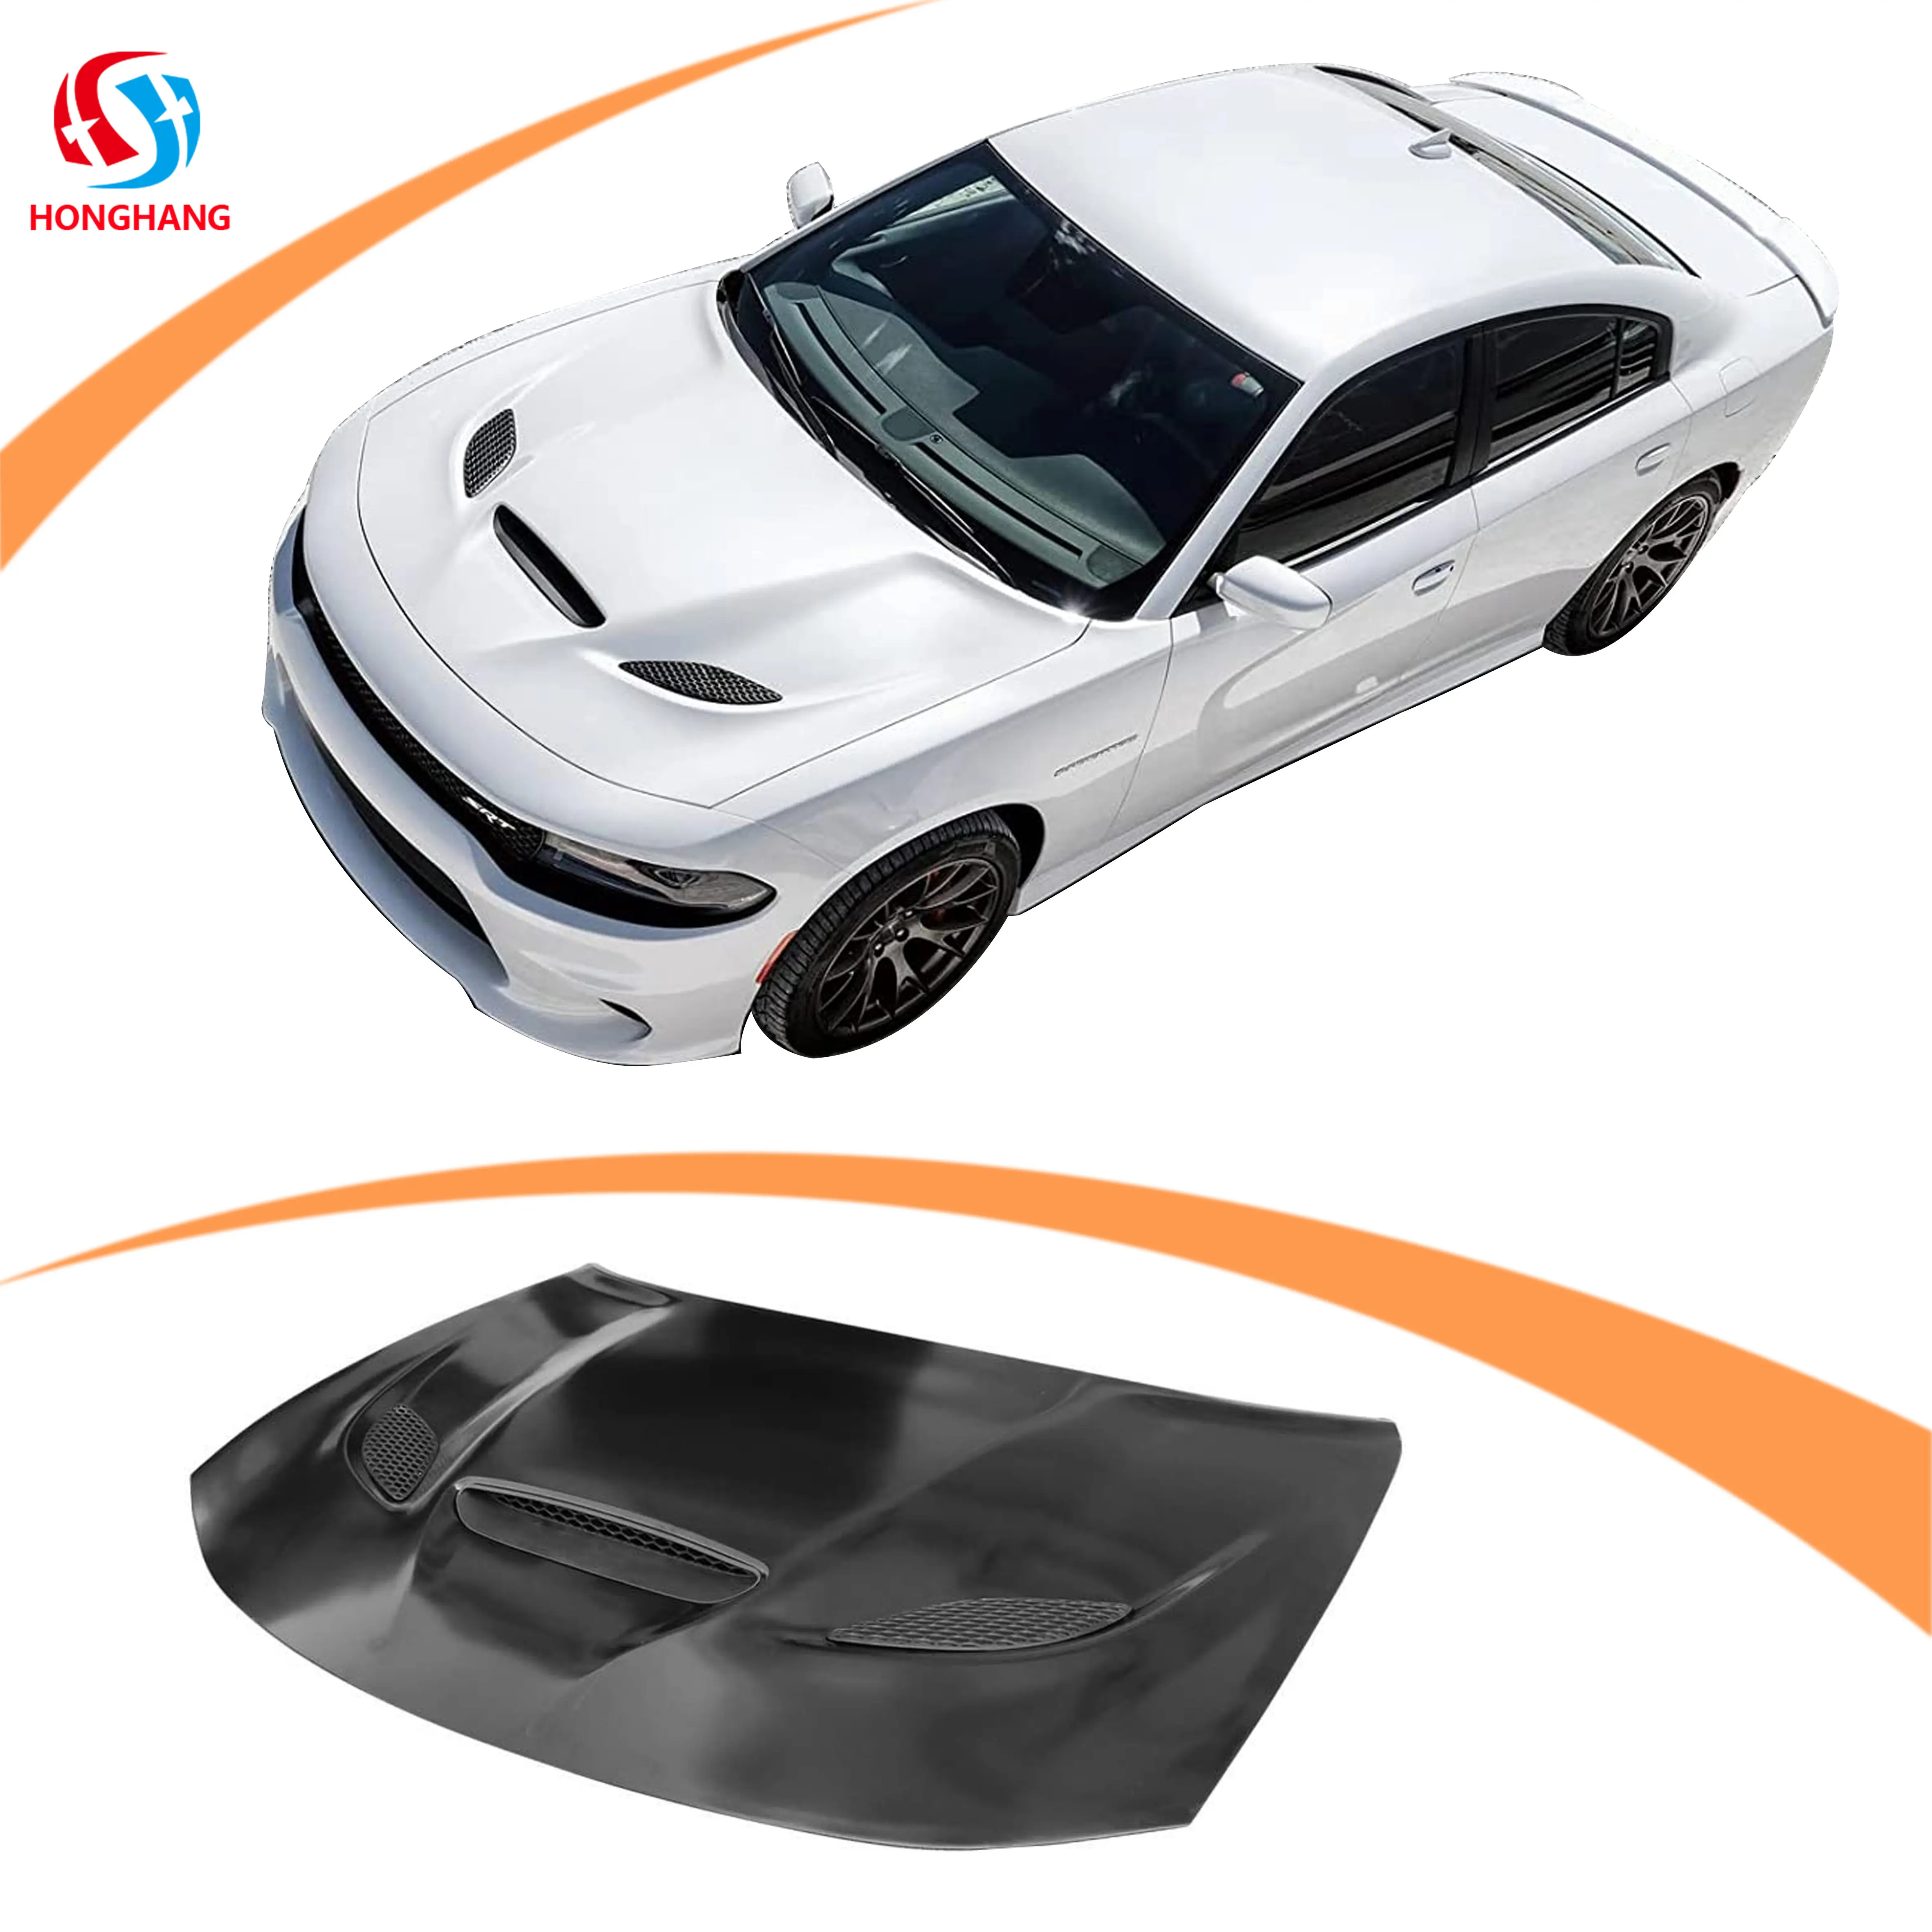 Honghang brand factory black Car Engine Hood Fireproof Covers Sport for dodge charger 2015 2016 2017 2018 2019 2020 2021